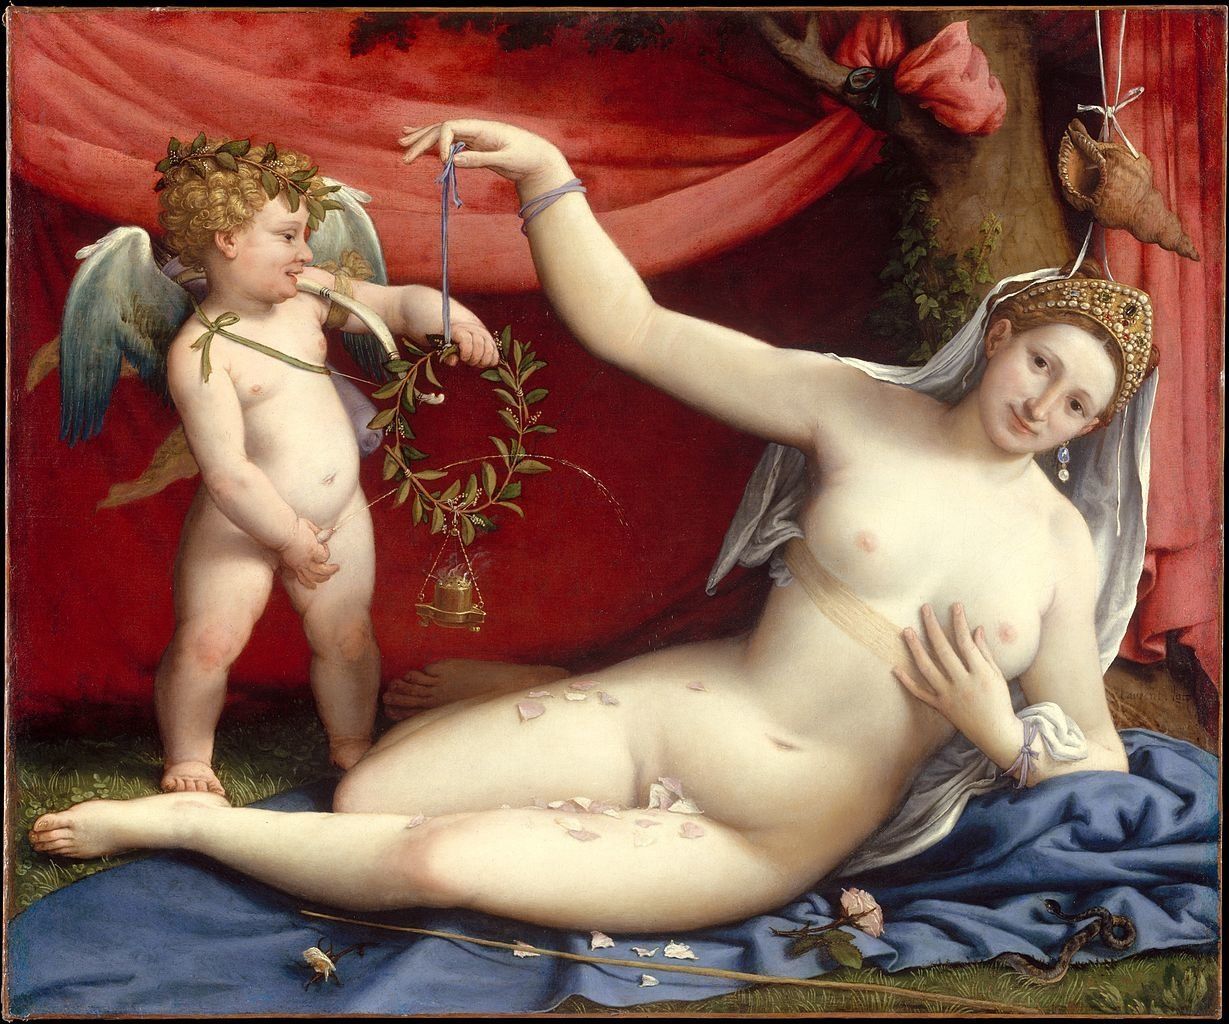 Lorenzo Lotto, "Venus and Cupid," late 1520s, oil on canvas, 92.4 cm (36.4 in) x 11.4 cm (4.5 in), Metropolitan Museum of Art Gallery 607